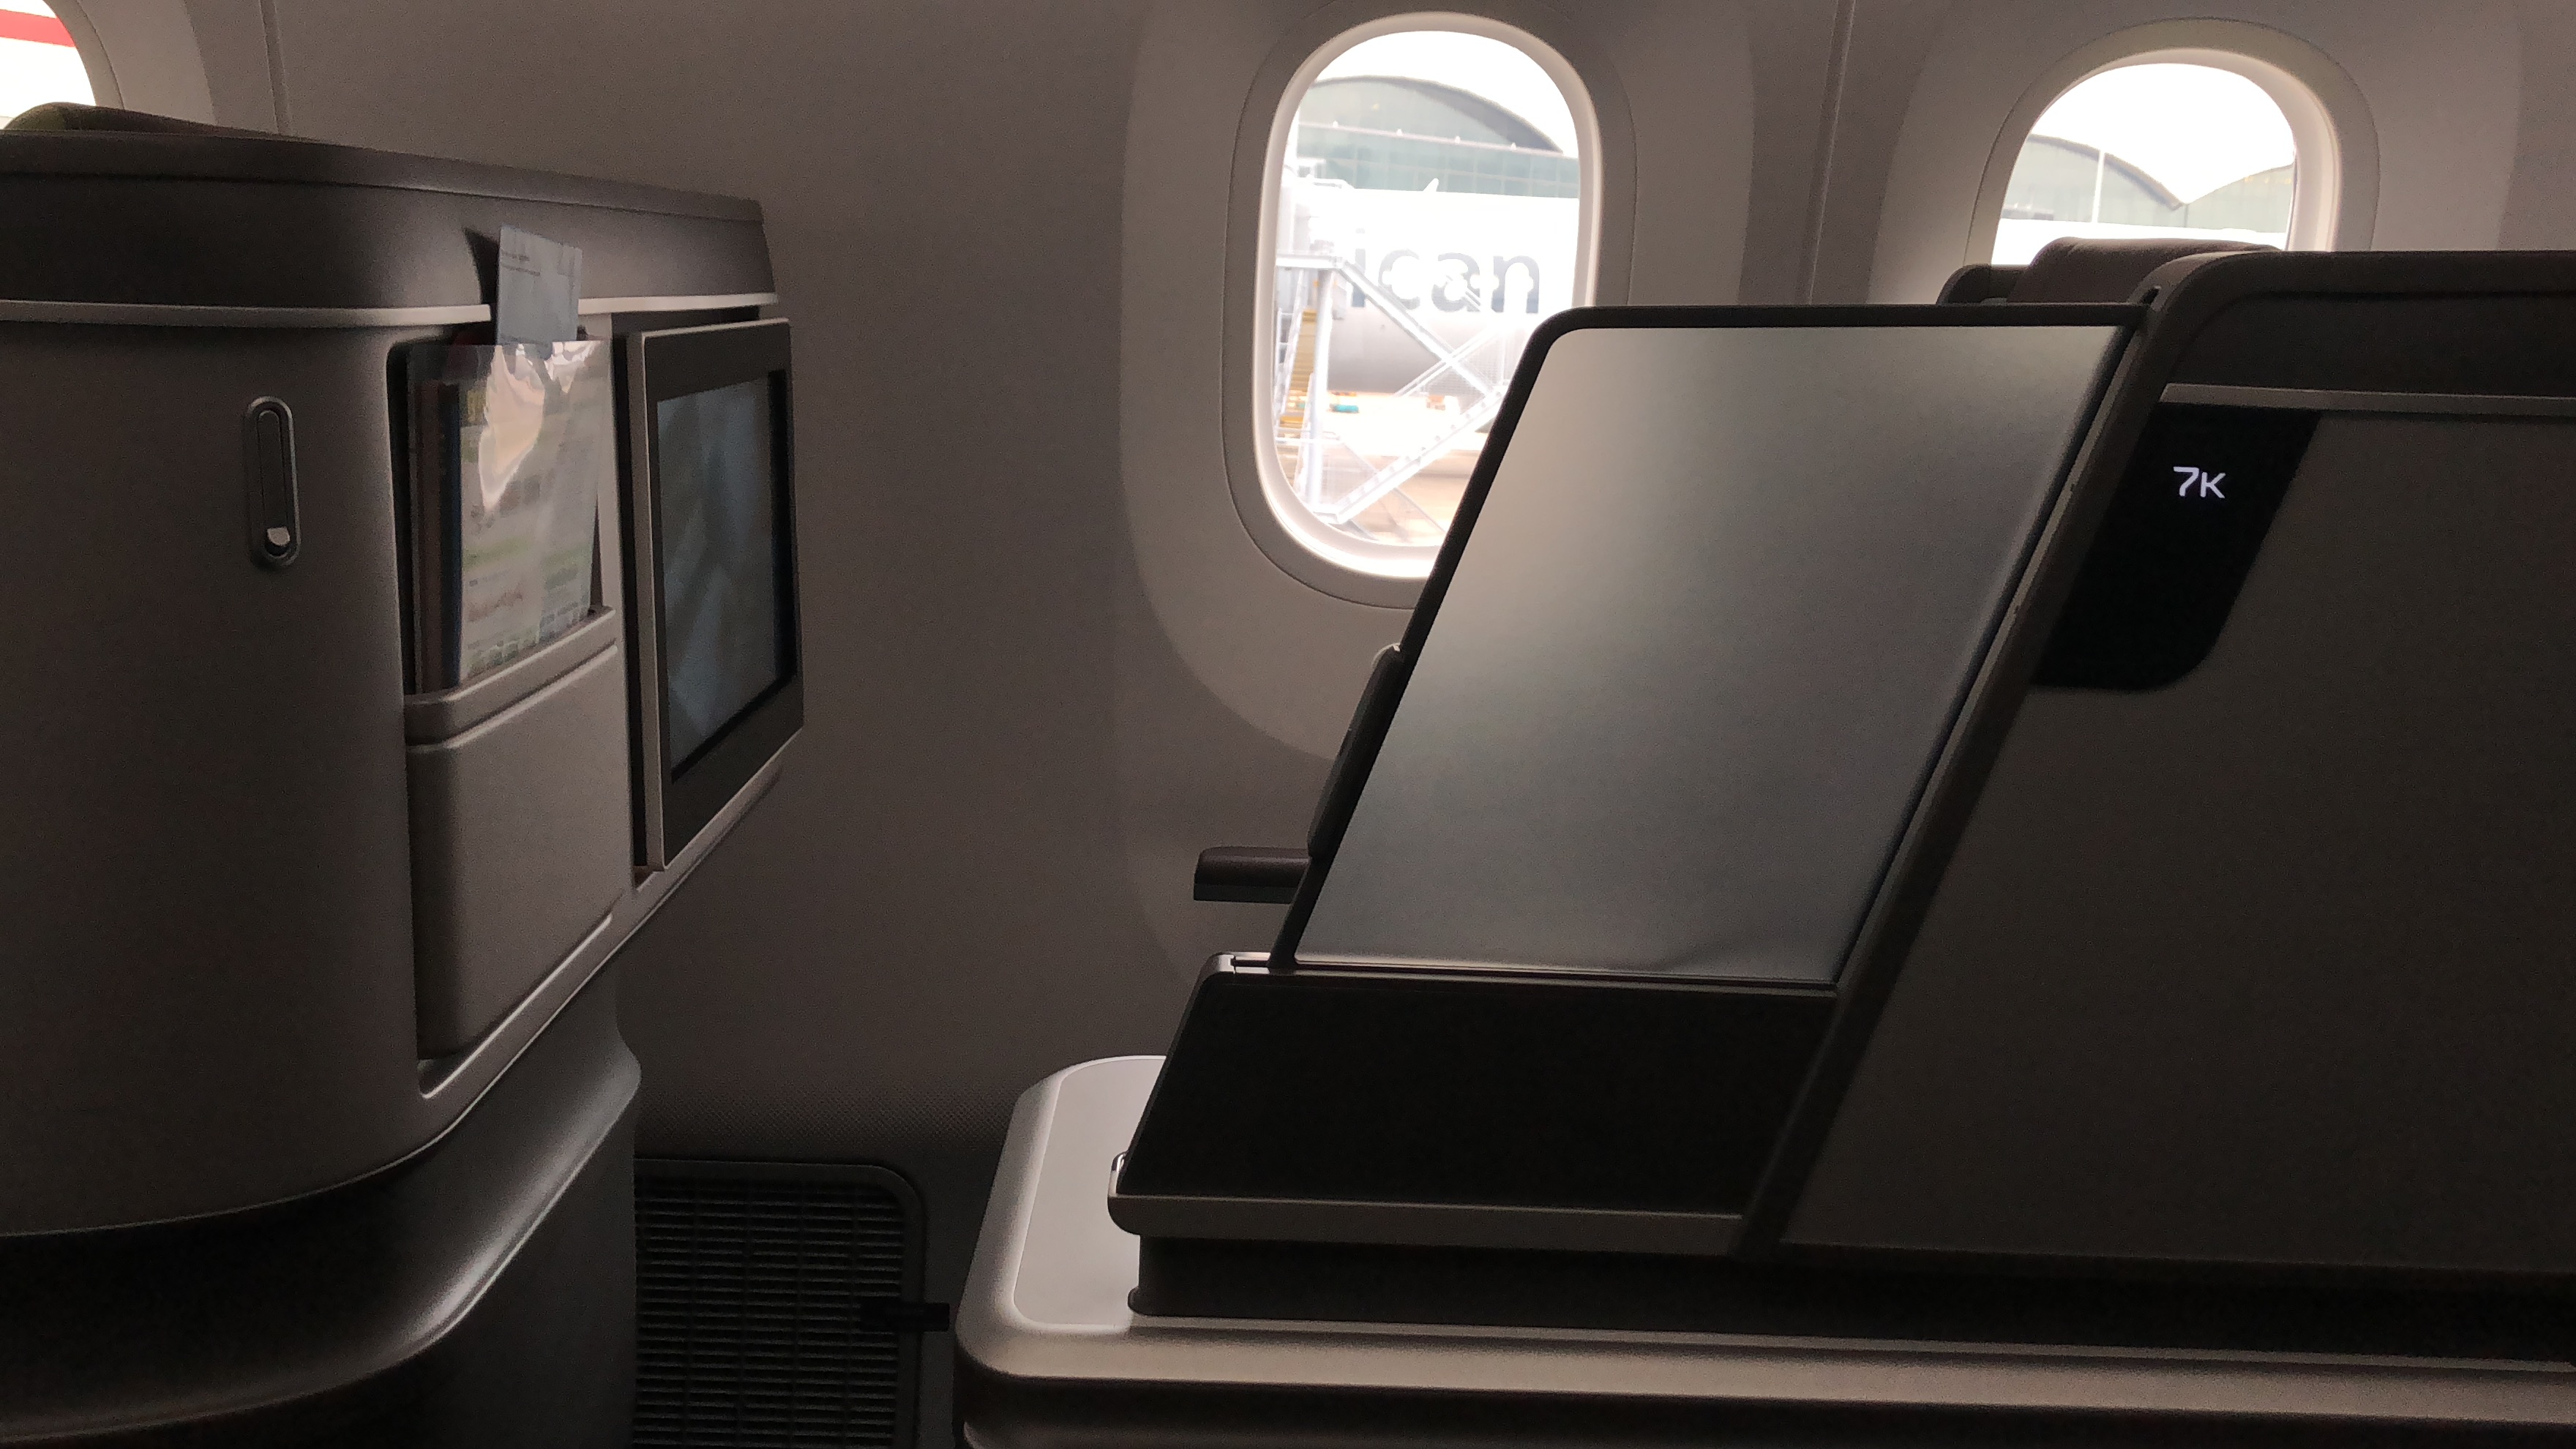 a screen on a table in an airplane